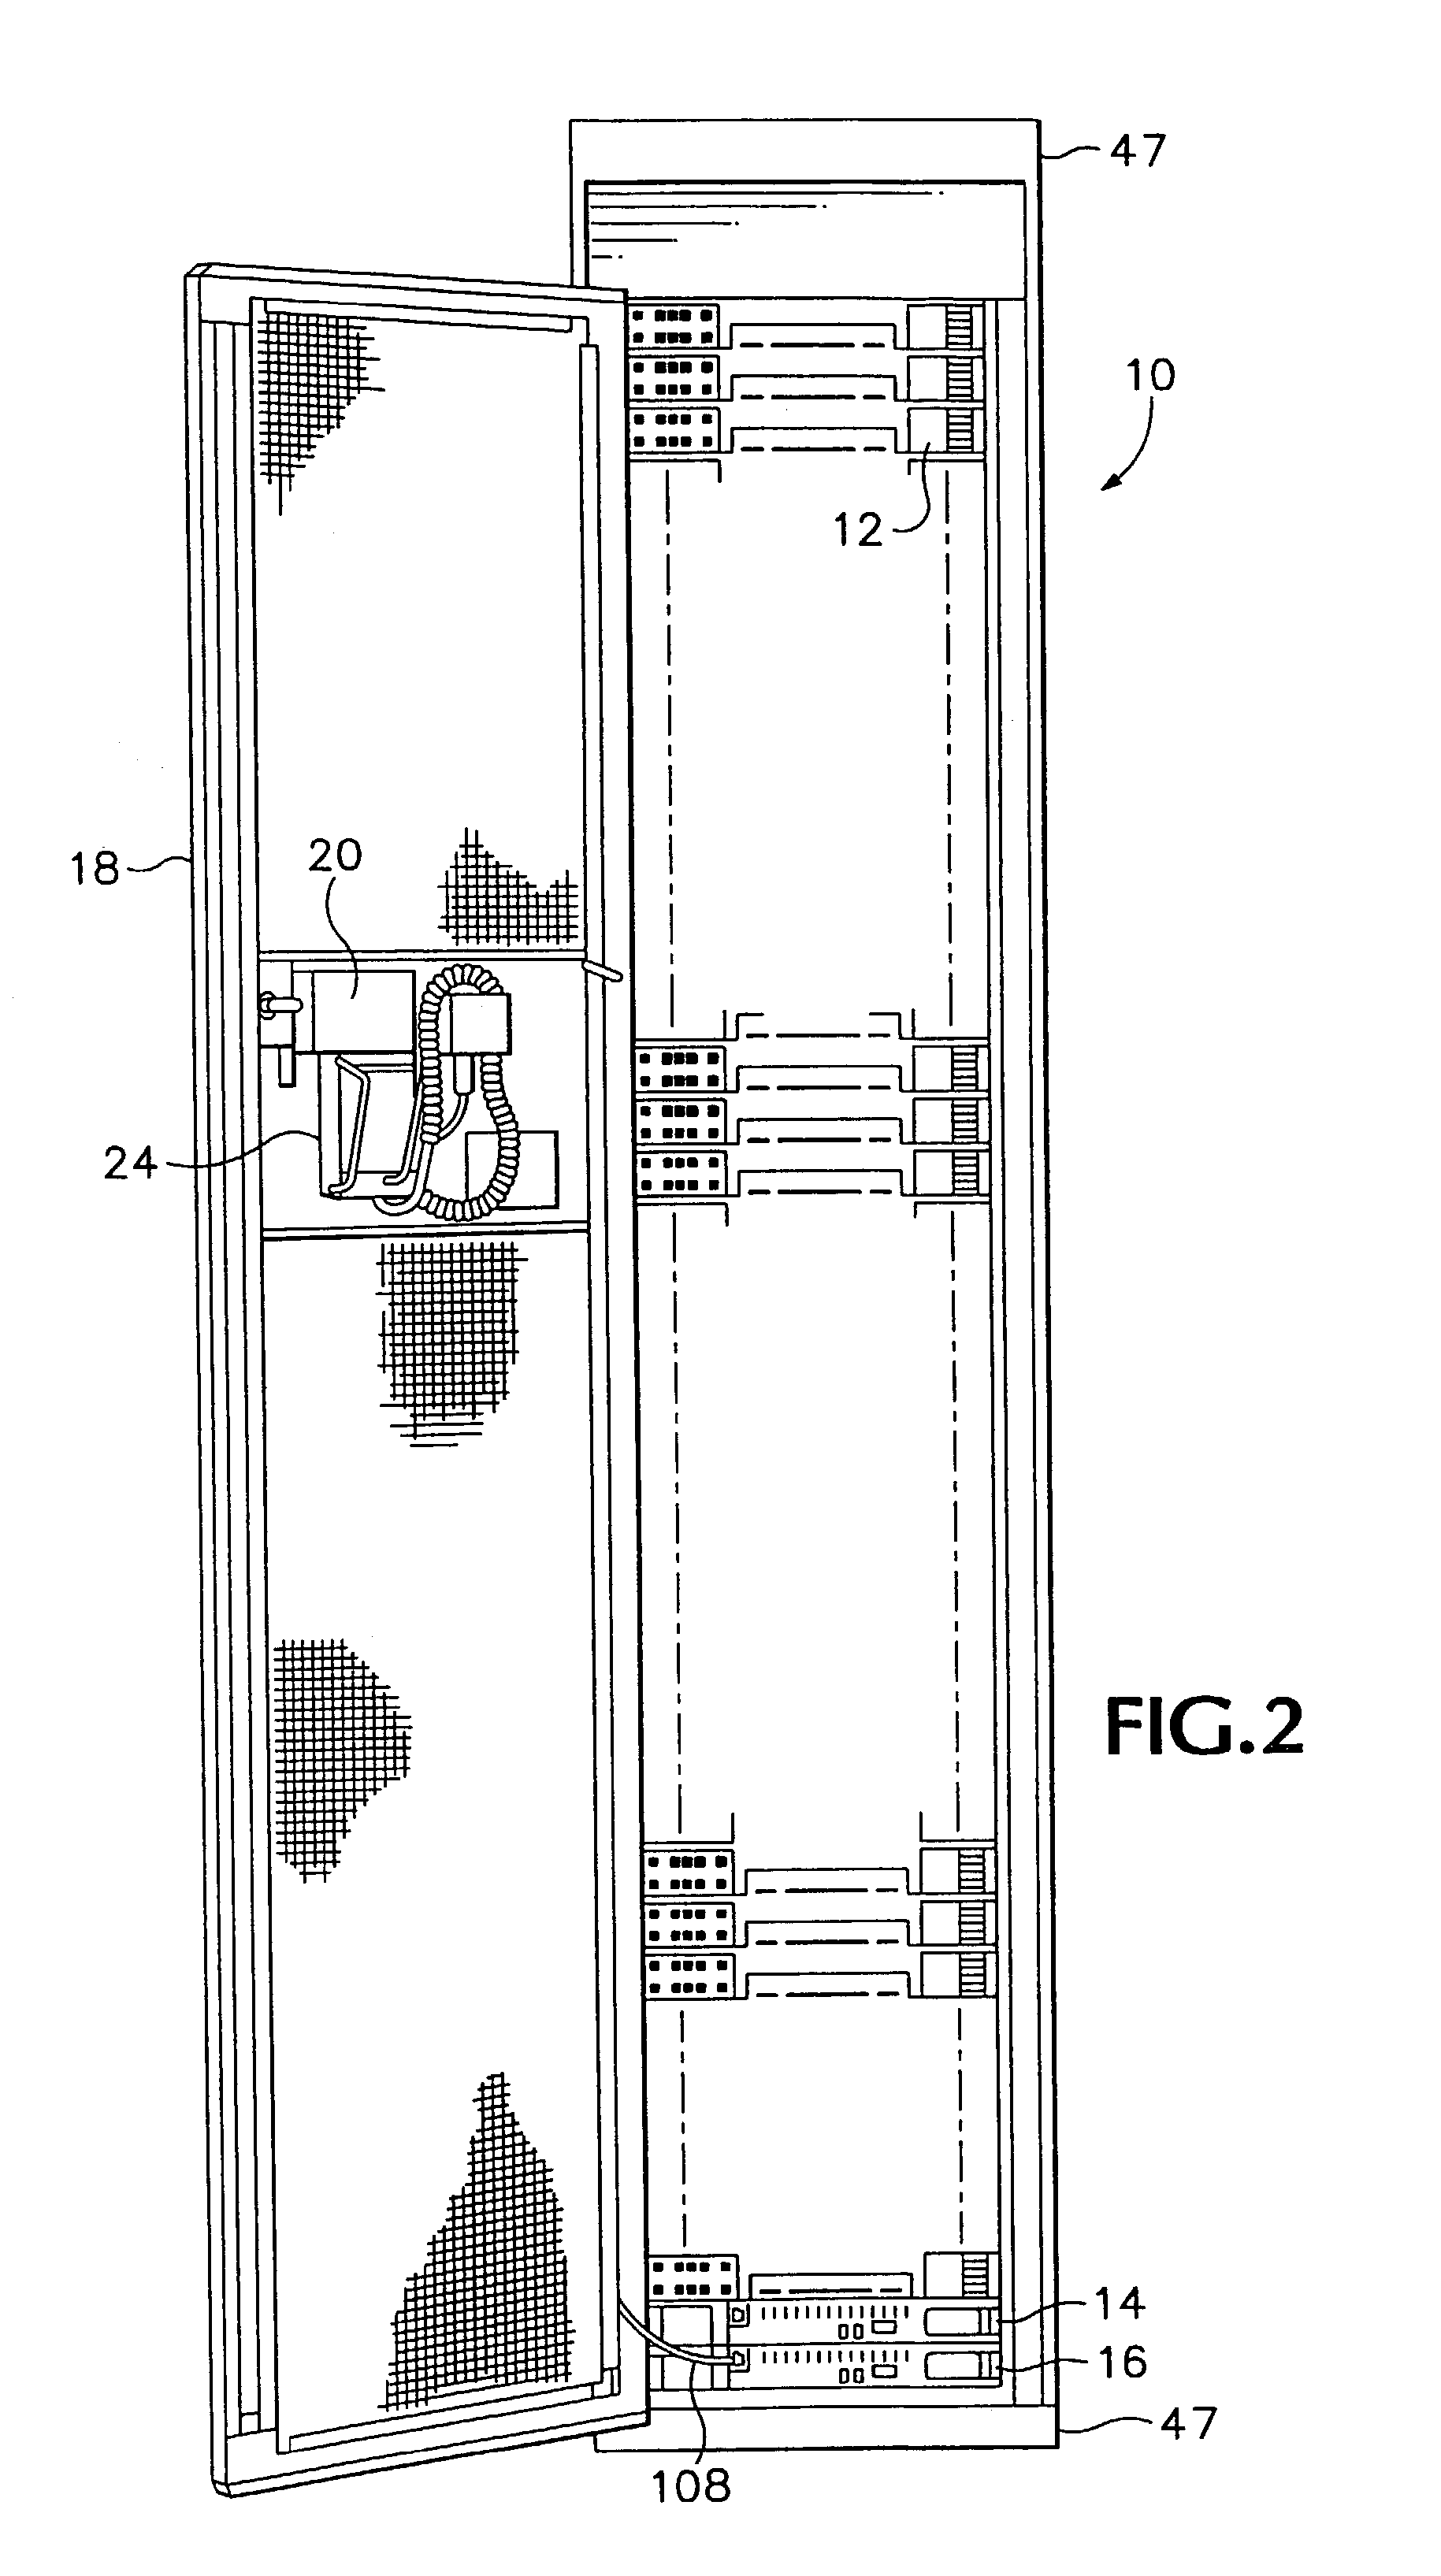 Dimming control system with distributed command processing